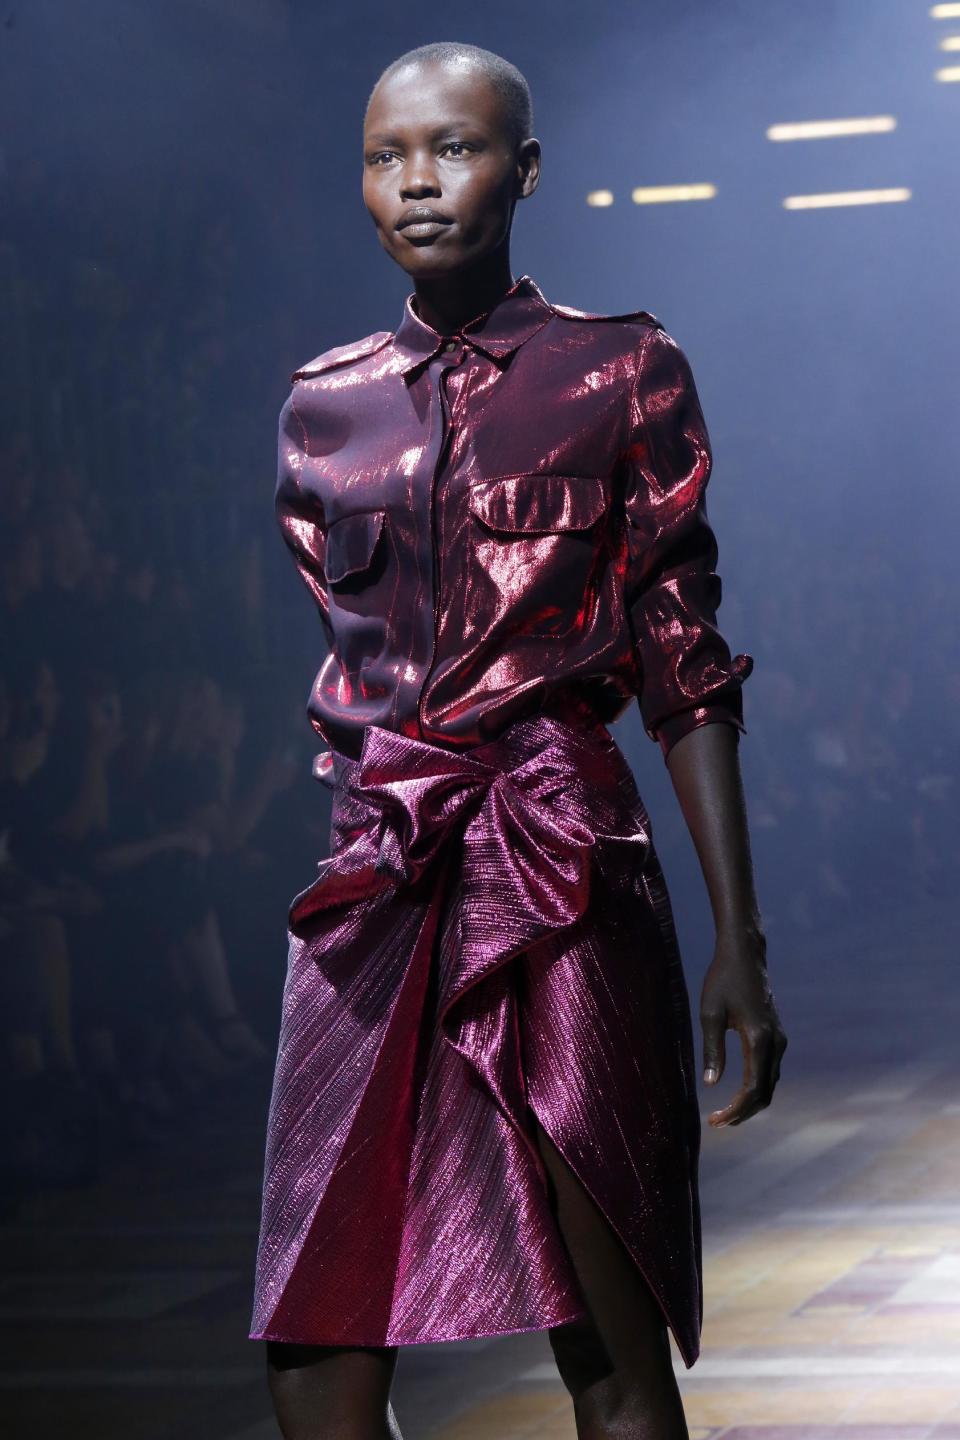 Model Alek Wek presents a creation as part of Lanvin's ready-to-wear Spring/Summer 2014 fashion collection, presented Thursday, Sept. 26, 2013 in Paris. (AP Photo/Jacques Brinon)